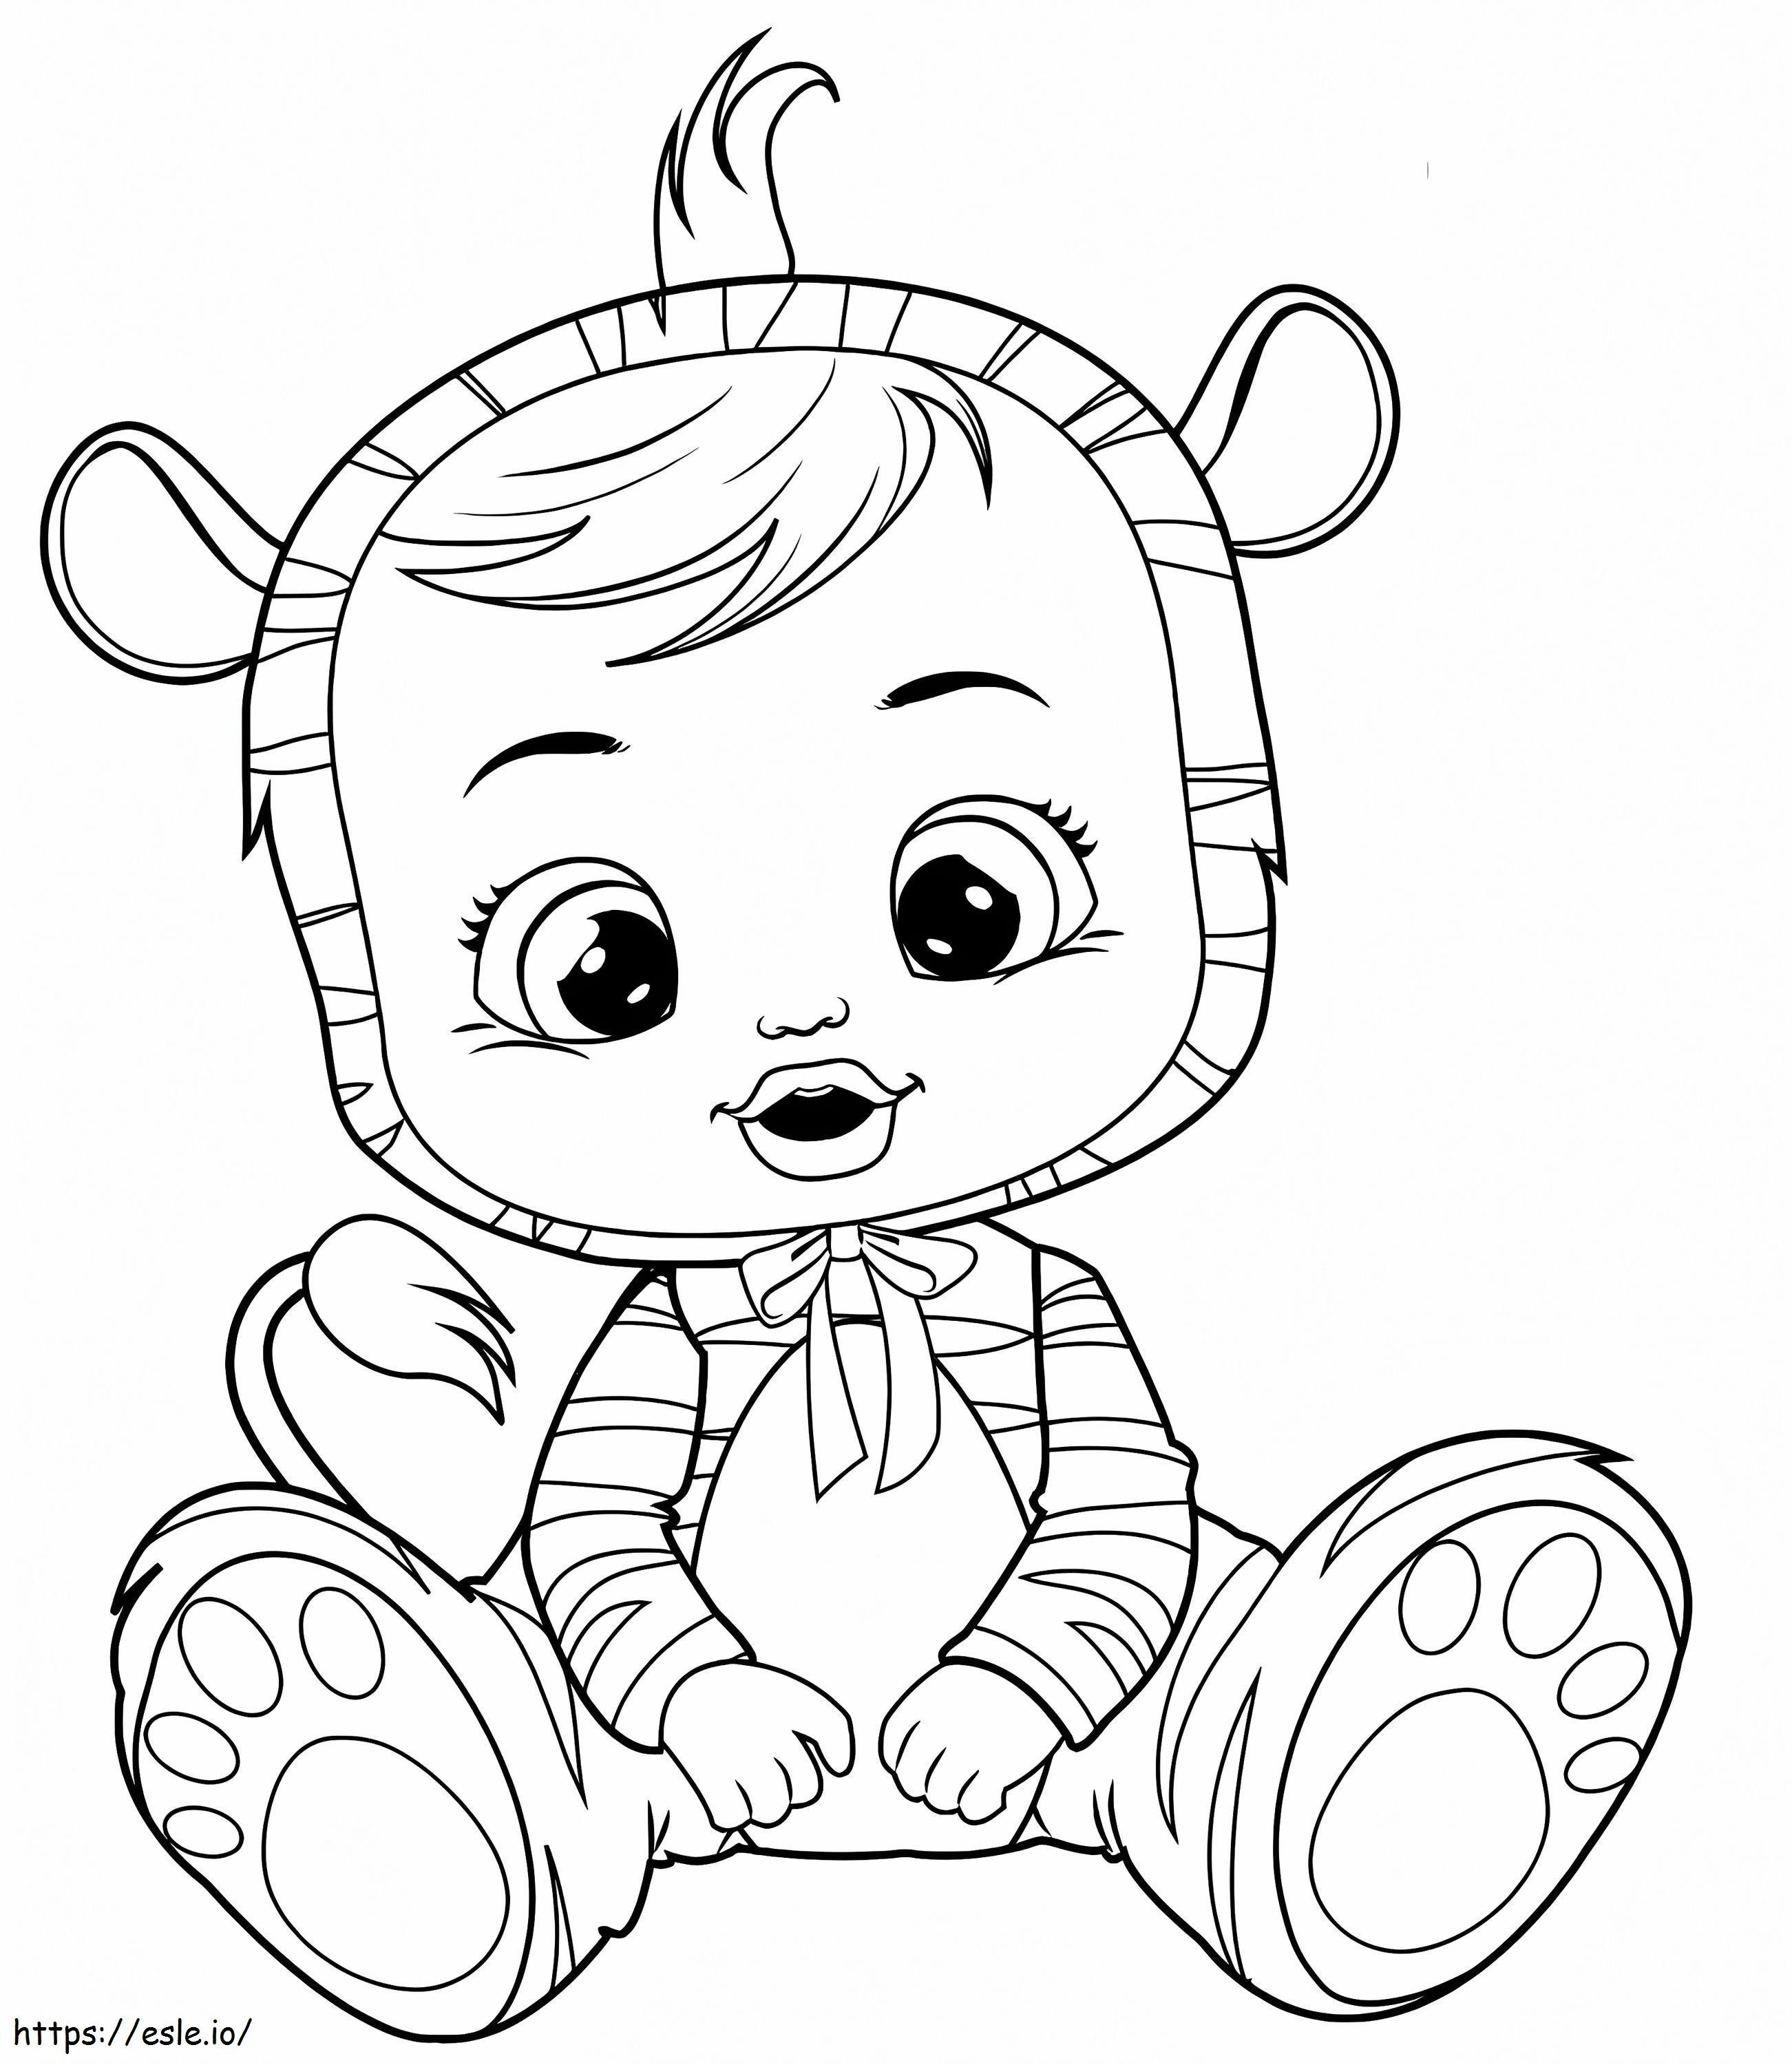 Nala Cry Baby coloring page